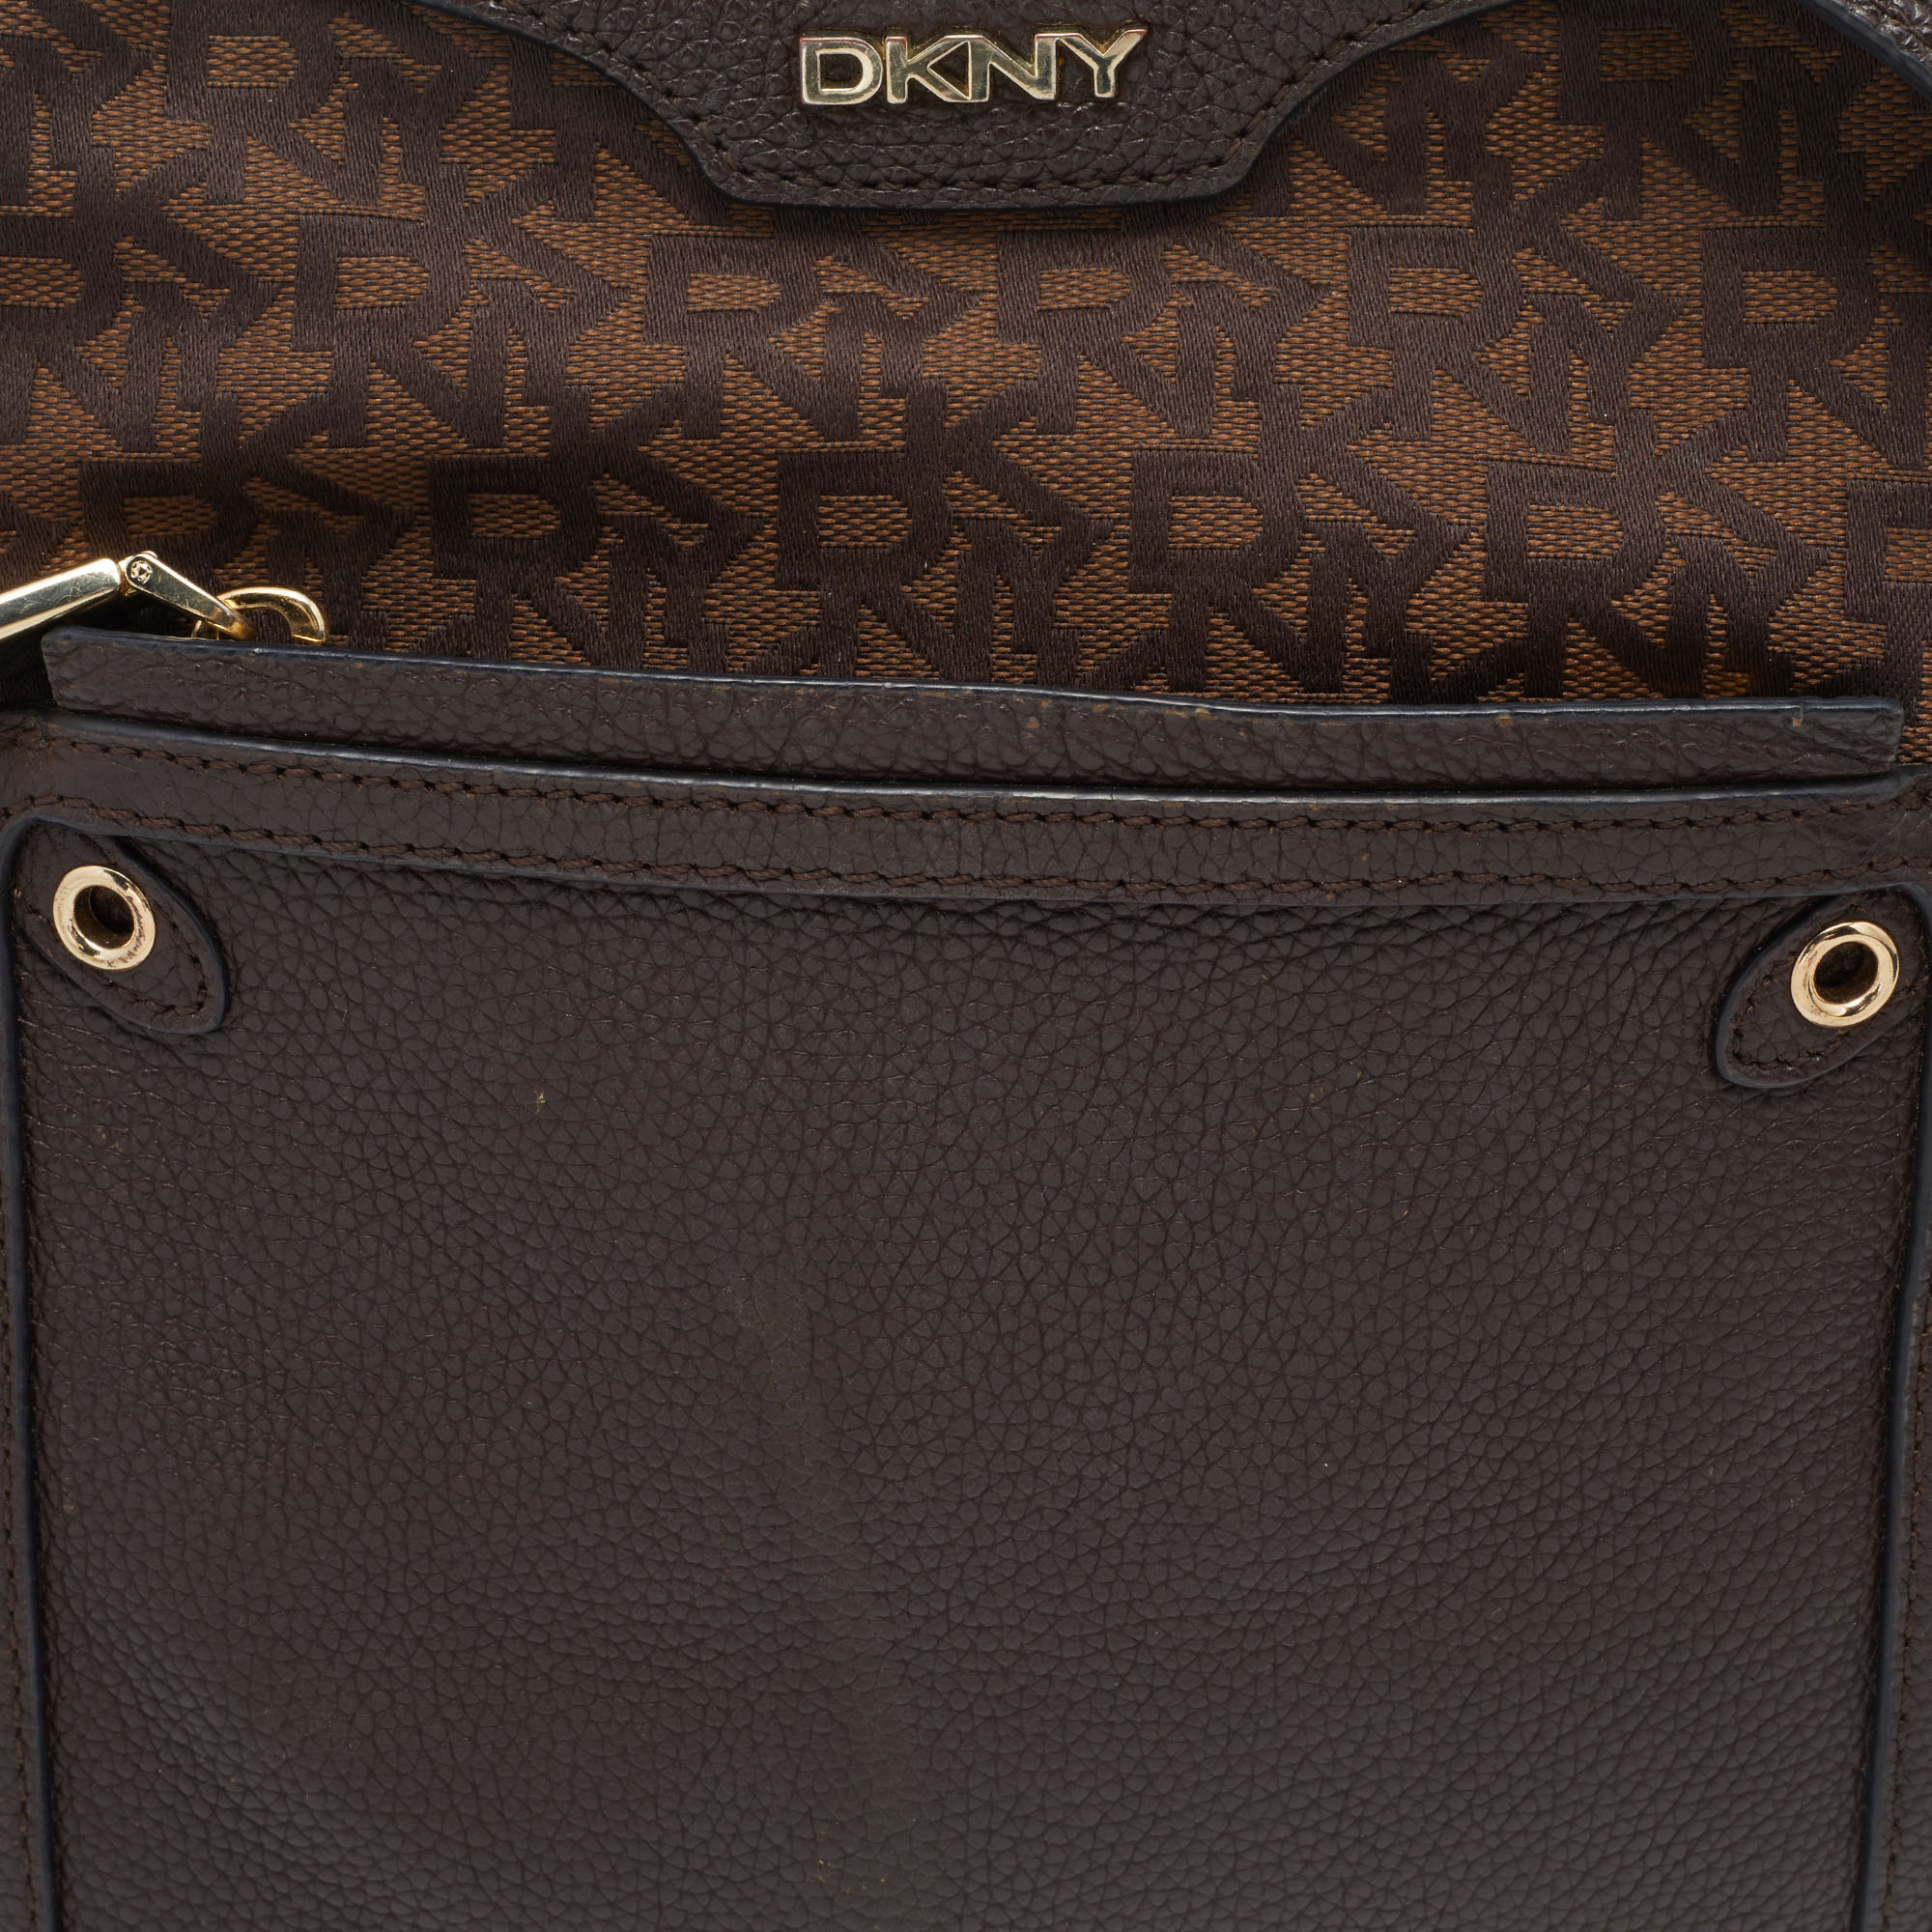 Dkny Brown Monogram Canvas And Leather Crossbody Bag